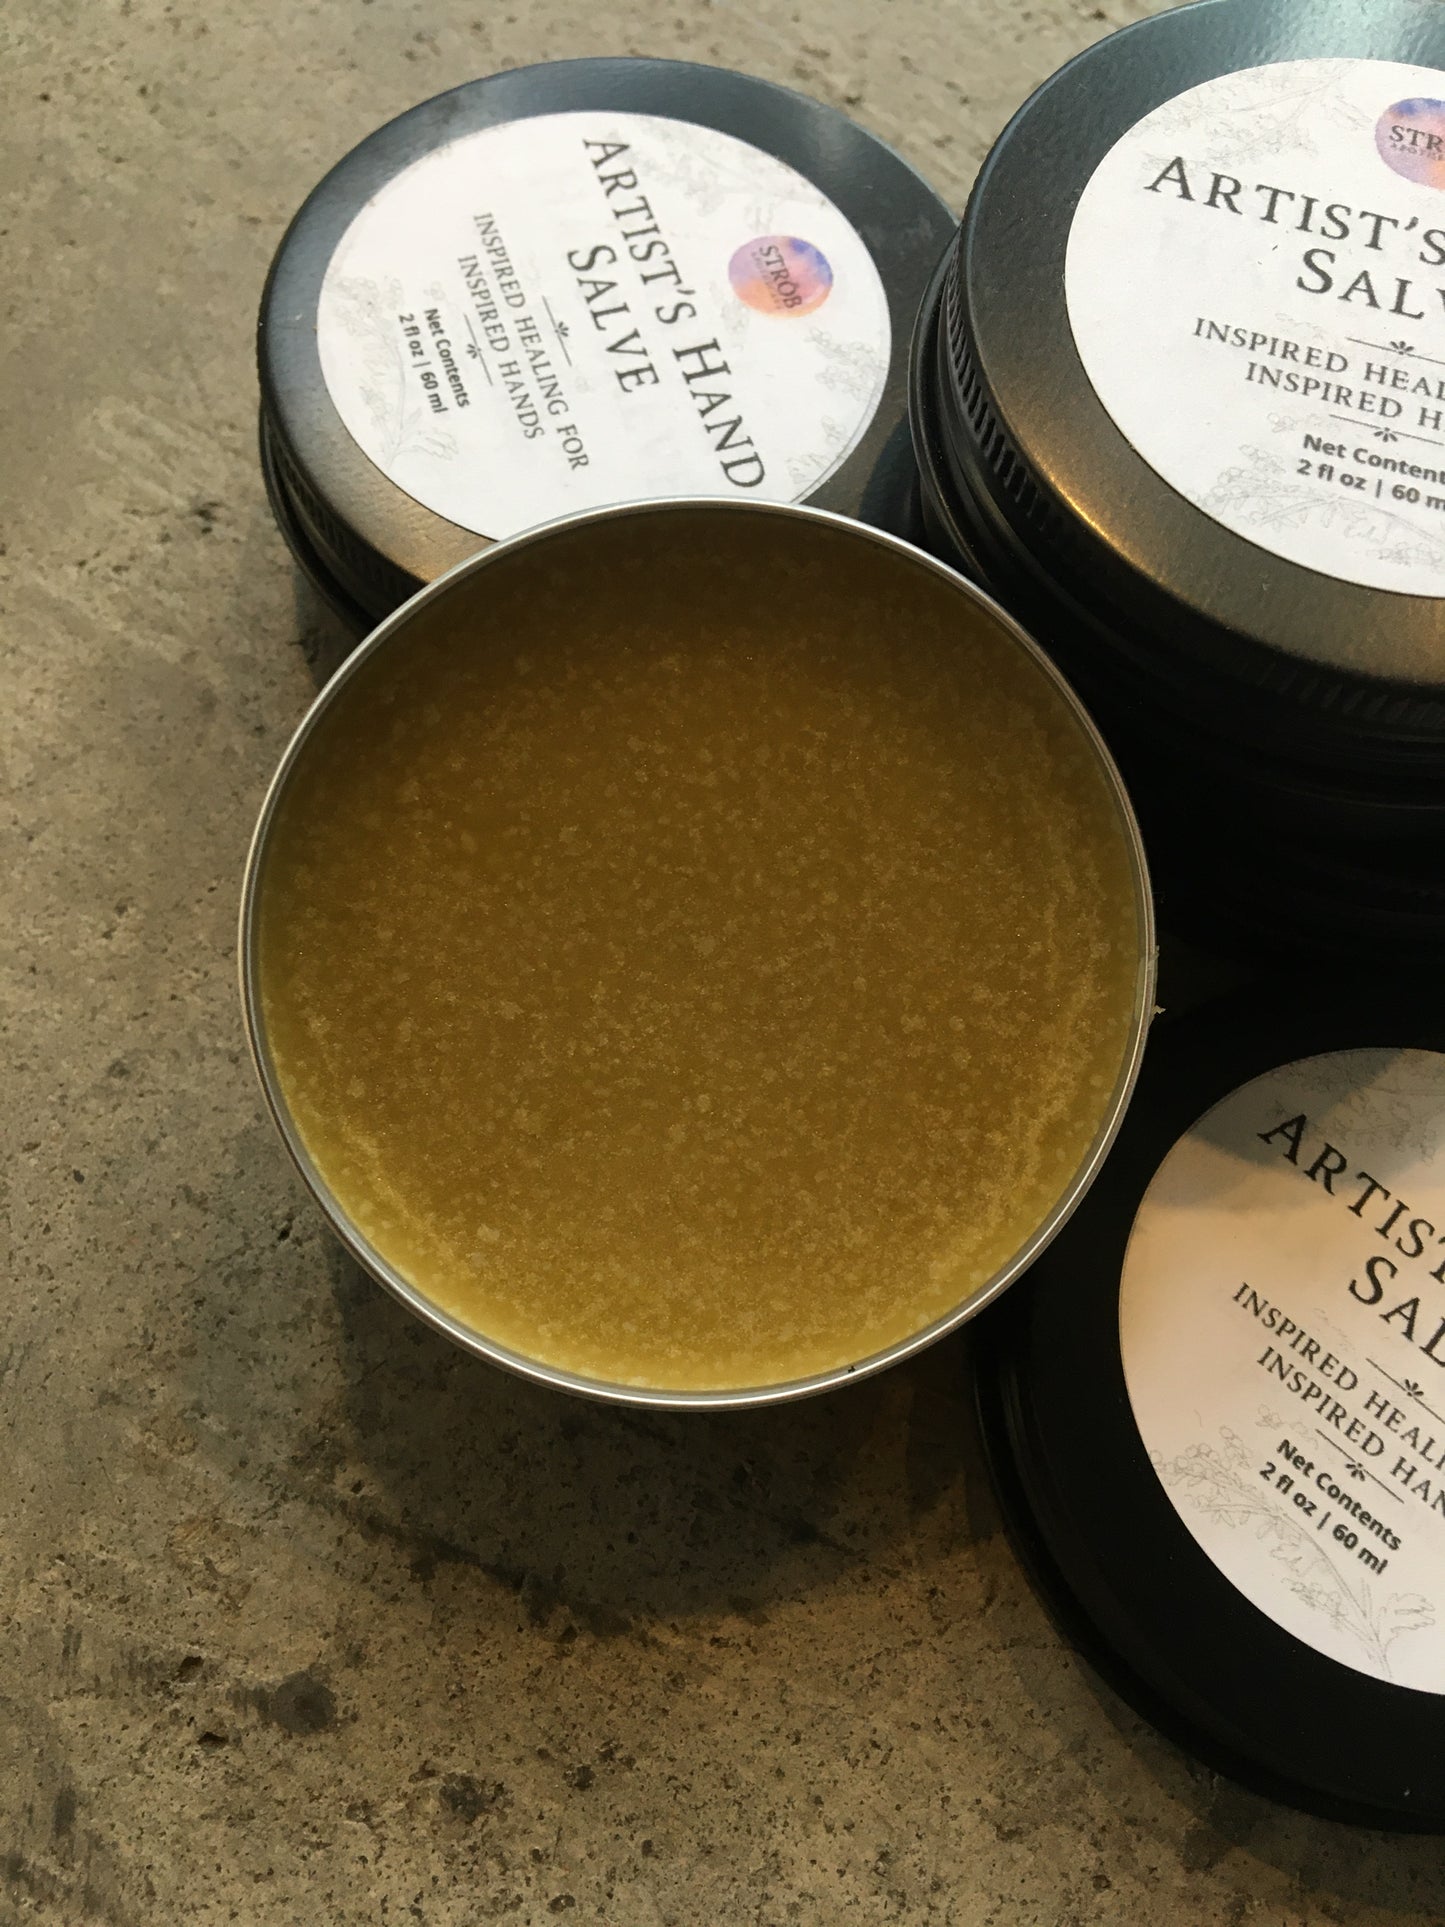 Artist's Hand Salve by Strob Apothecary